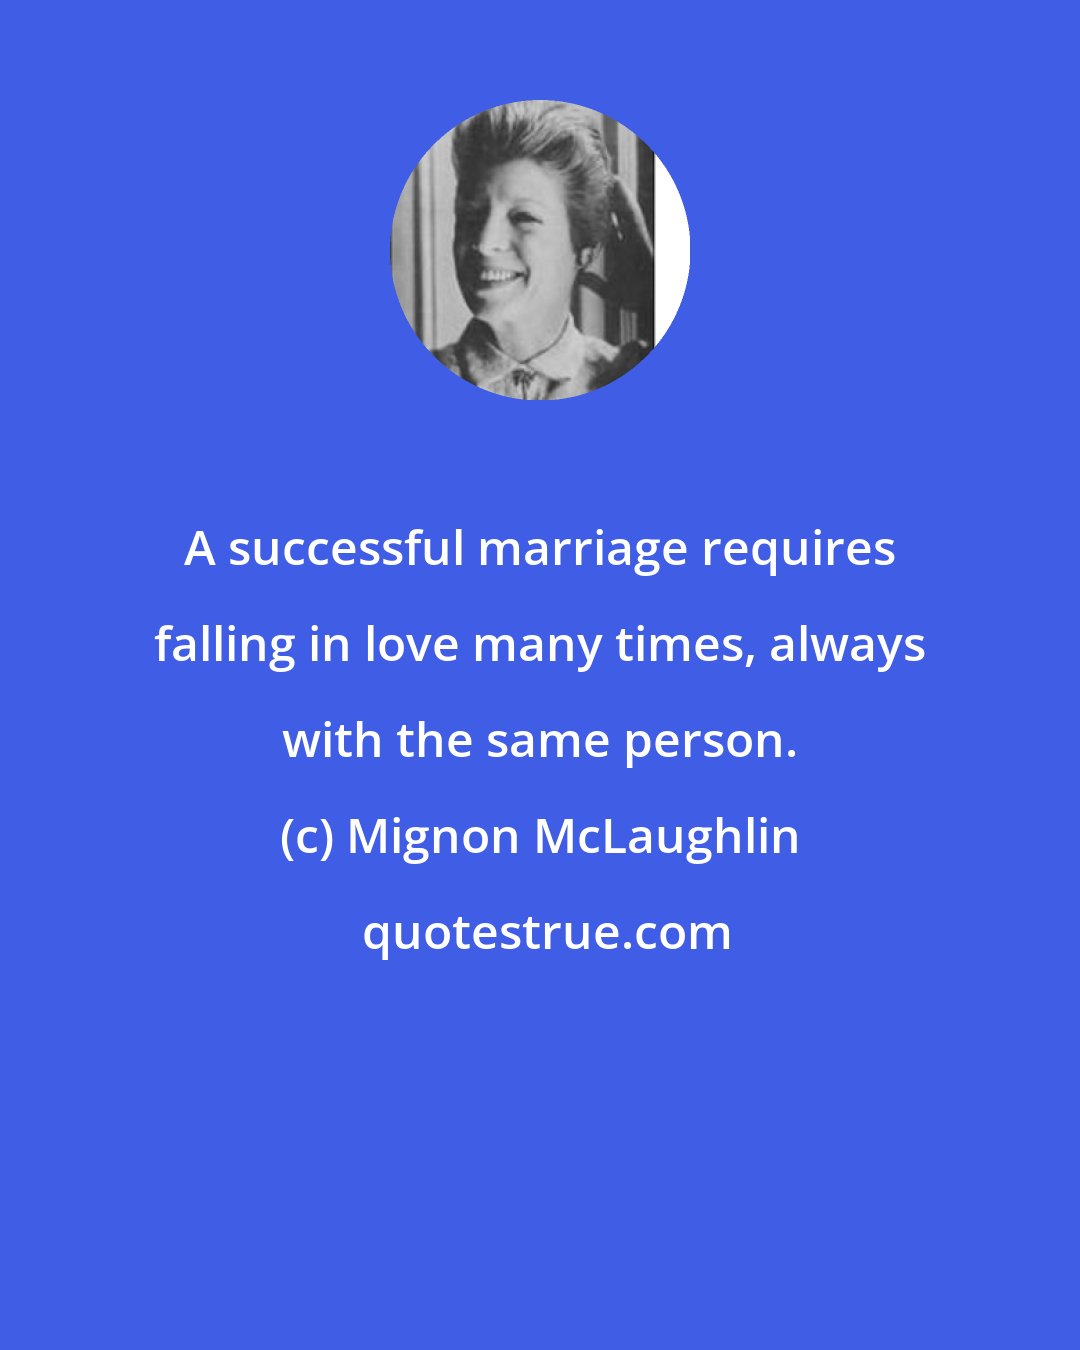 Mignon McLaughlin: A successful marriage requires falling in love many times, always with the same person.